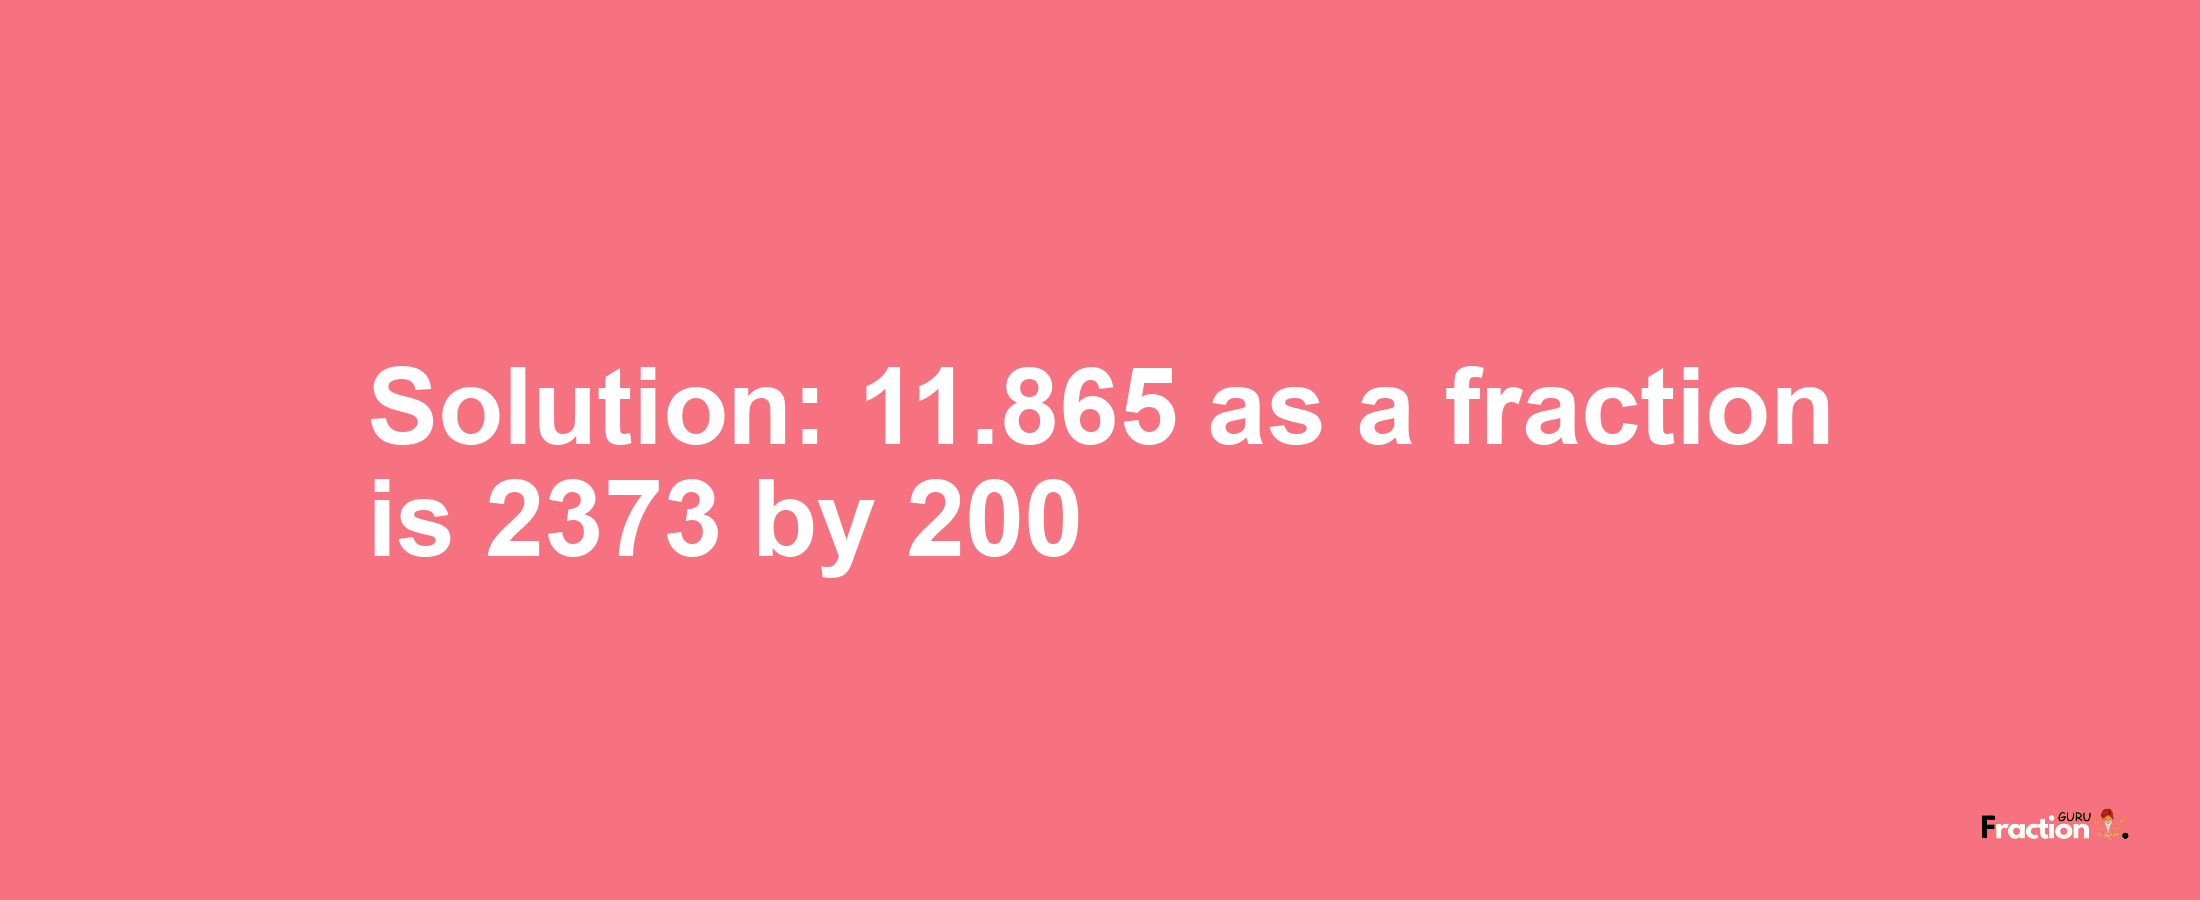 Solution:11.865 as a fraction is 2373/200